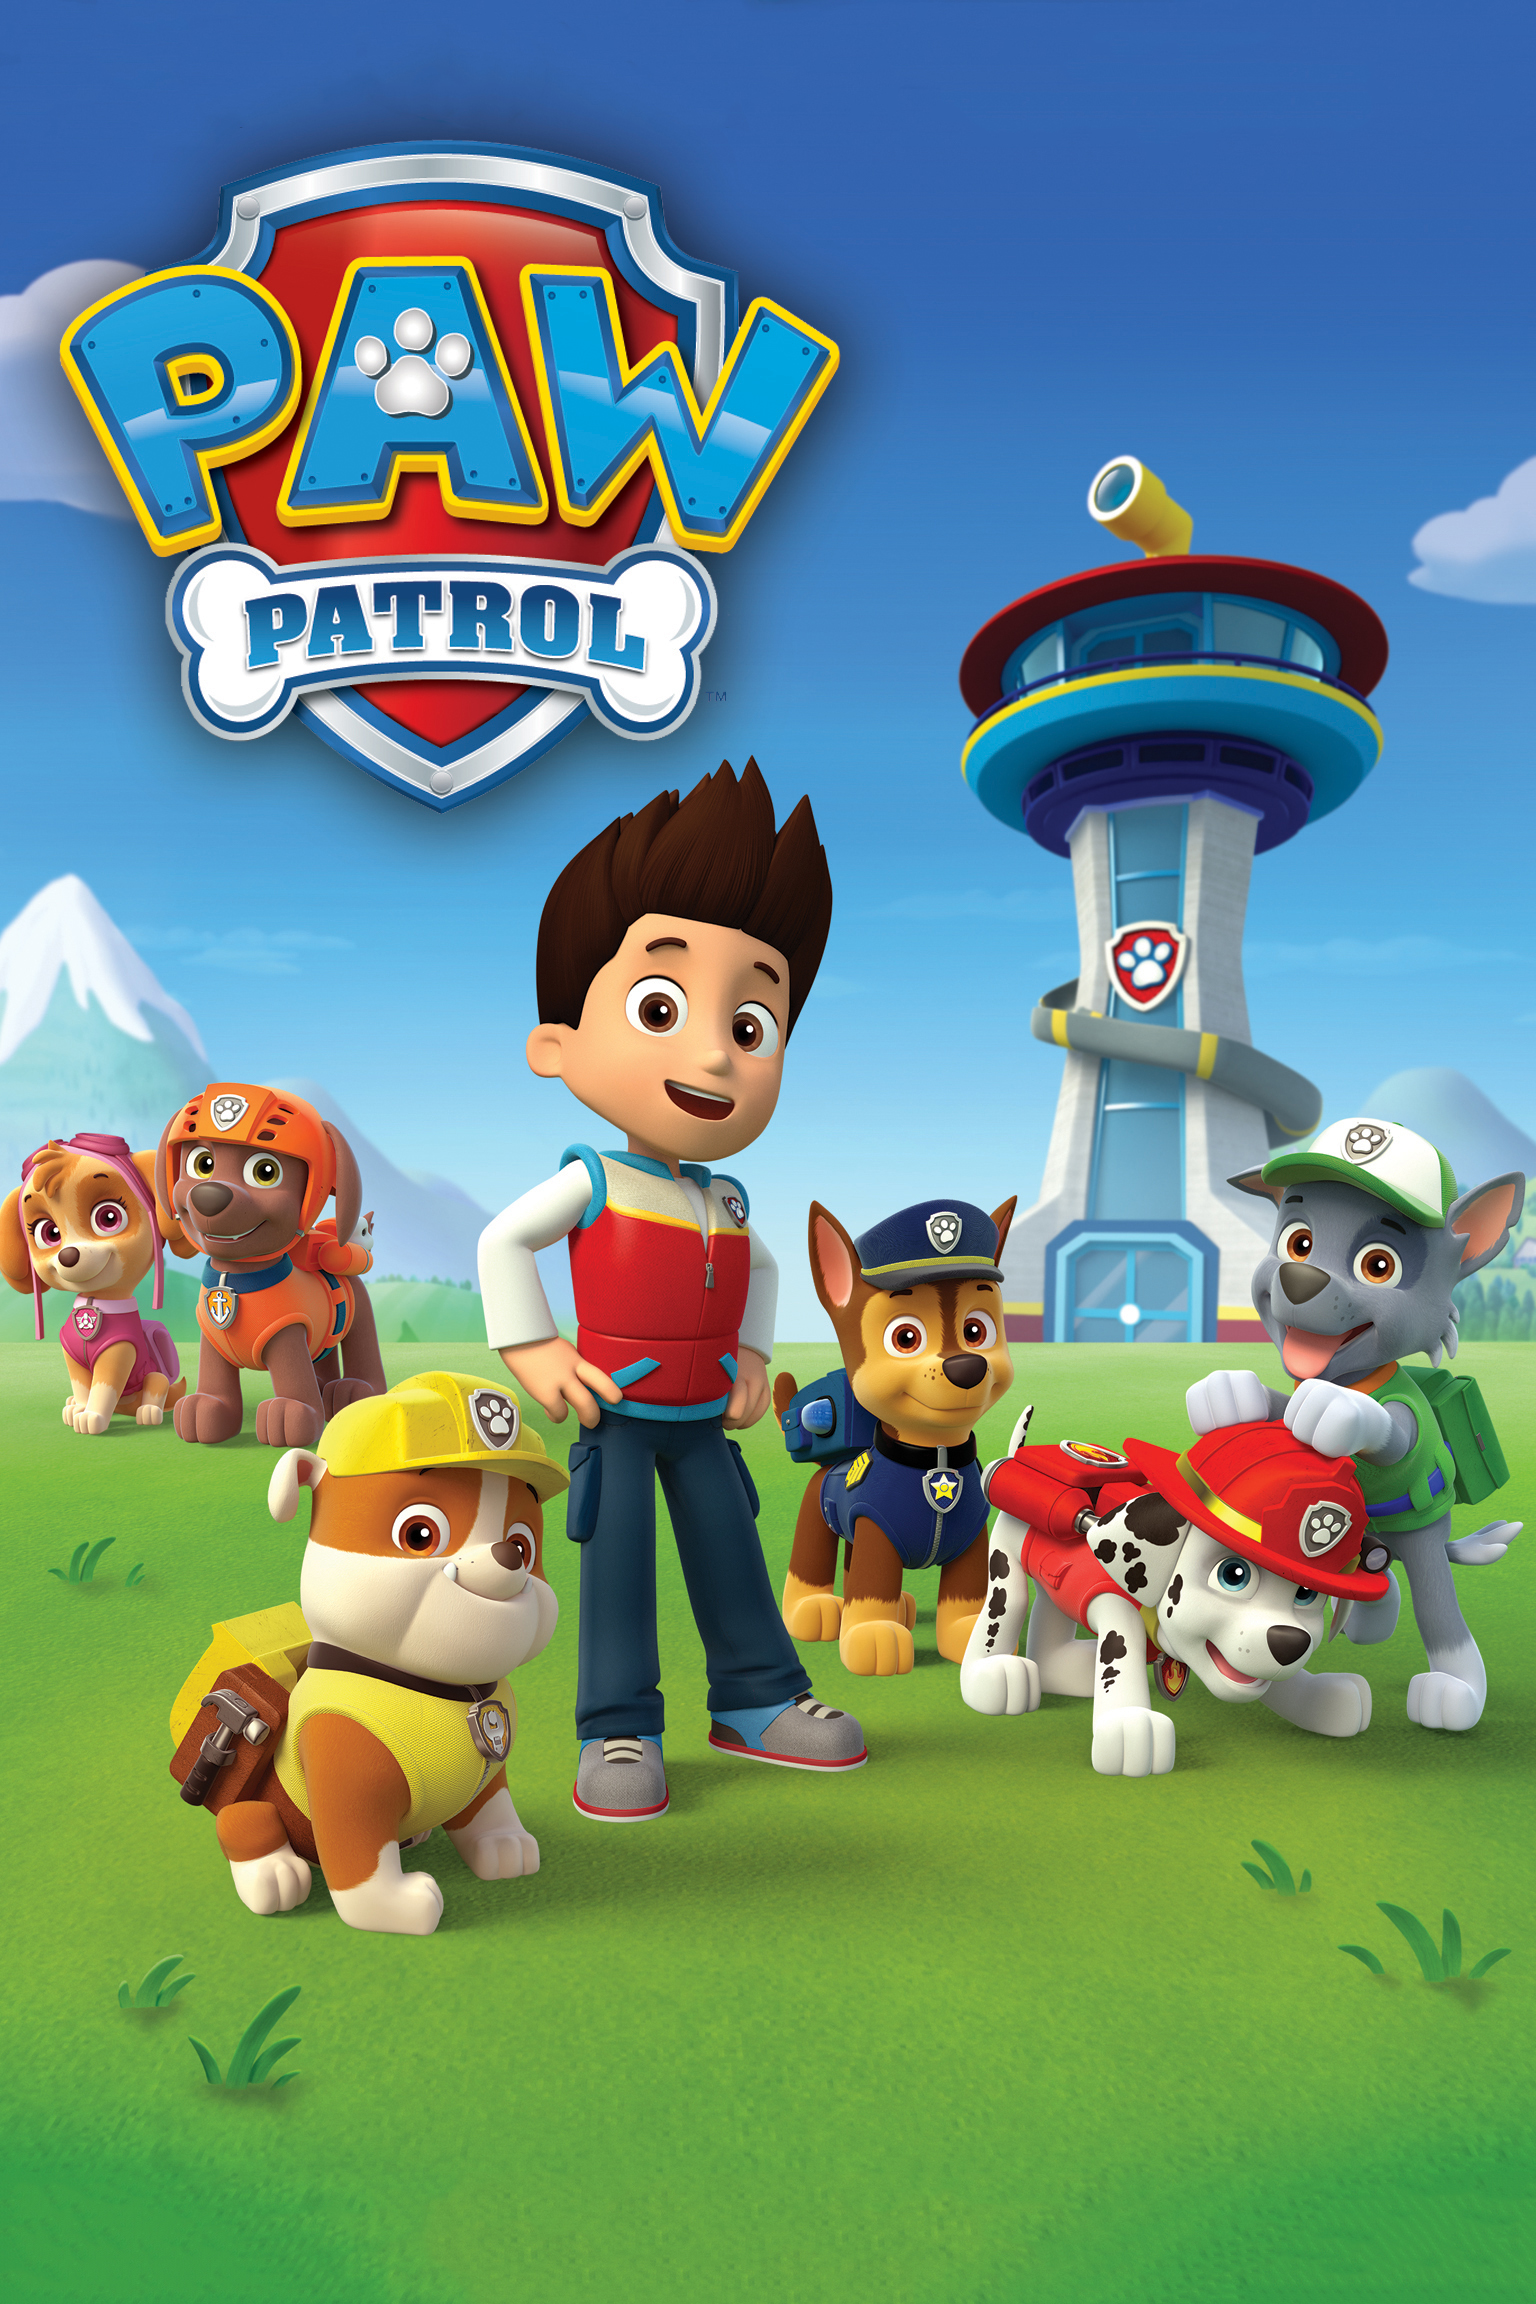 https://static.wikia.nocookie.net/paw-patrol/images/8/8d/PAW_Patrol_%28TV_Series%29_Wallpaper.jpg/revision/latest?cb=20230330052133